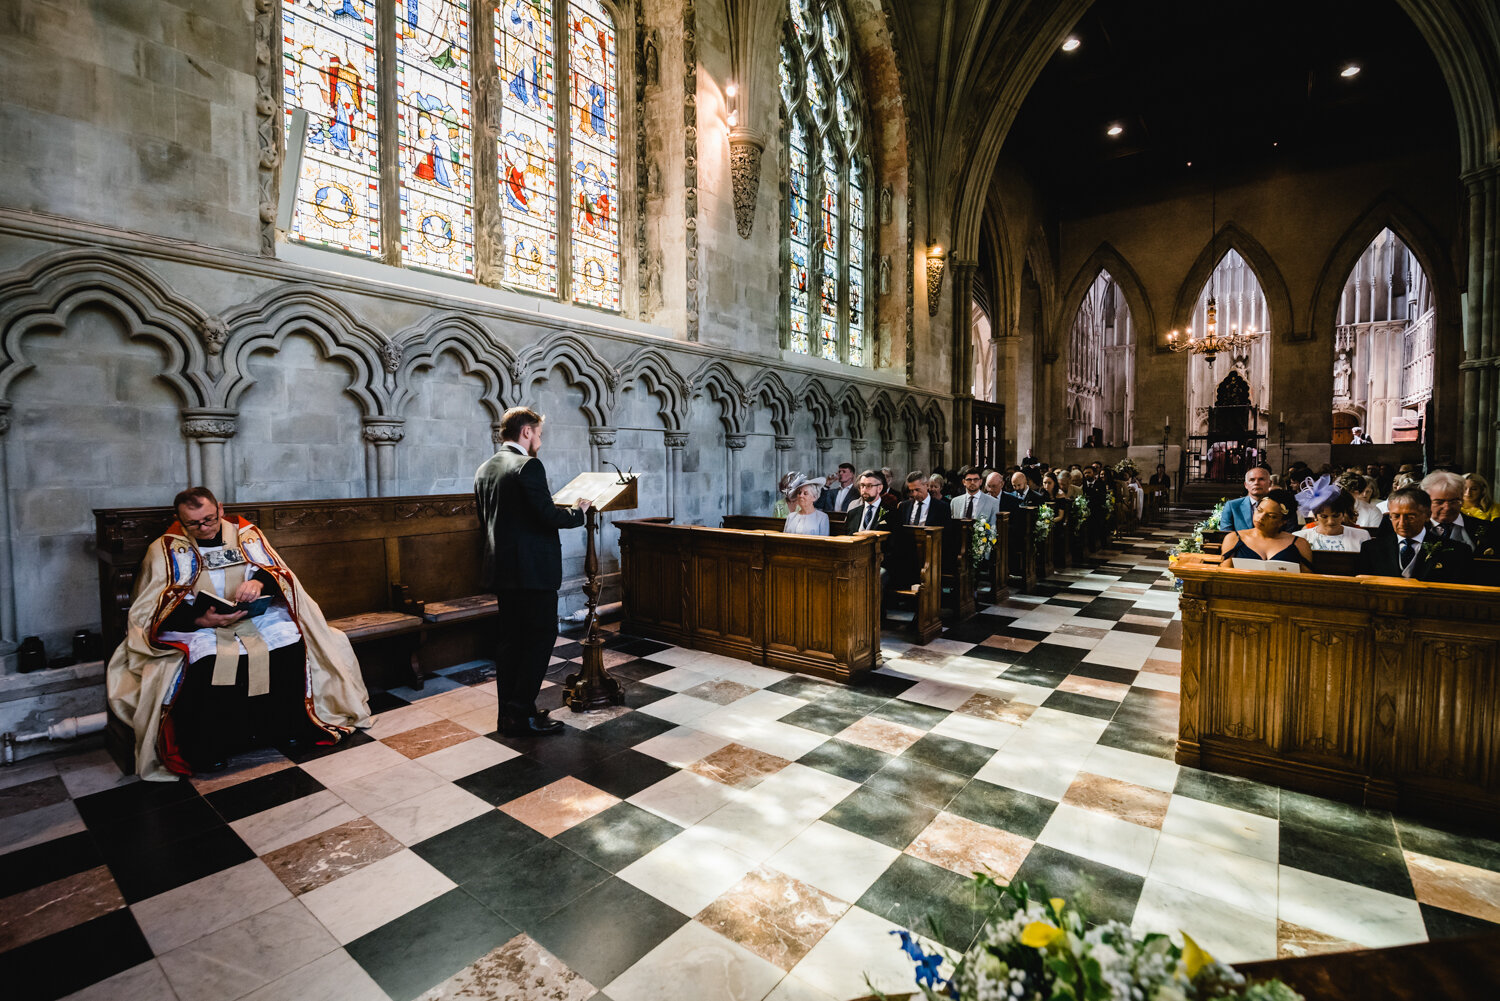 st-albans-cathedral-abbey-wedding-photos-pike-photography-155.jpg